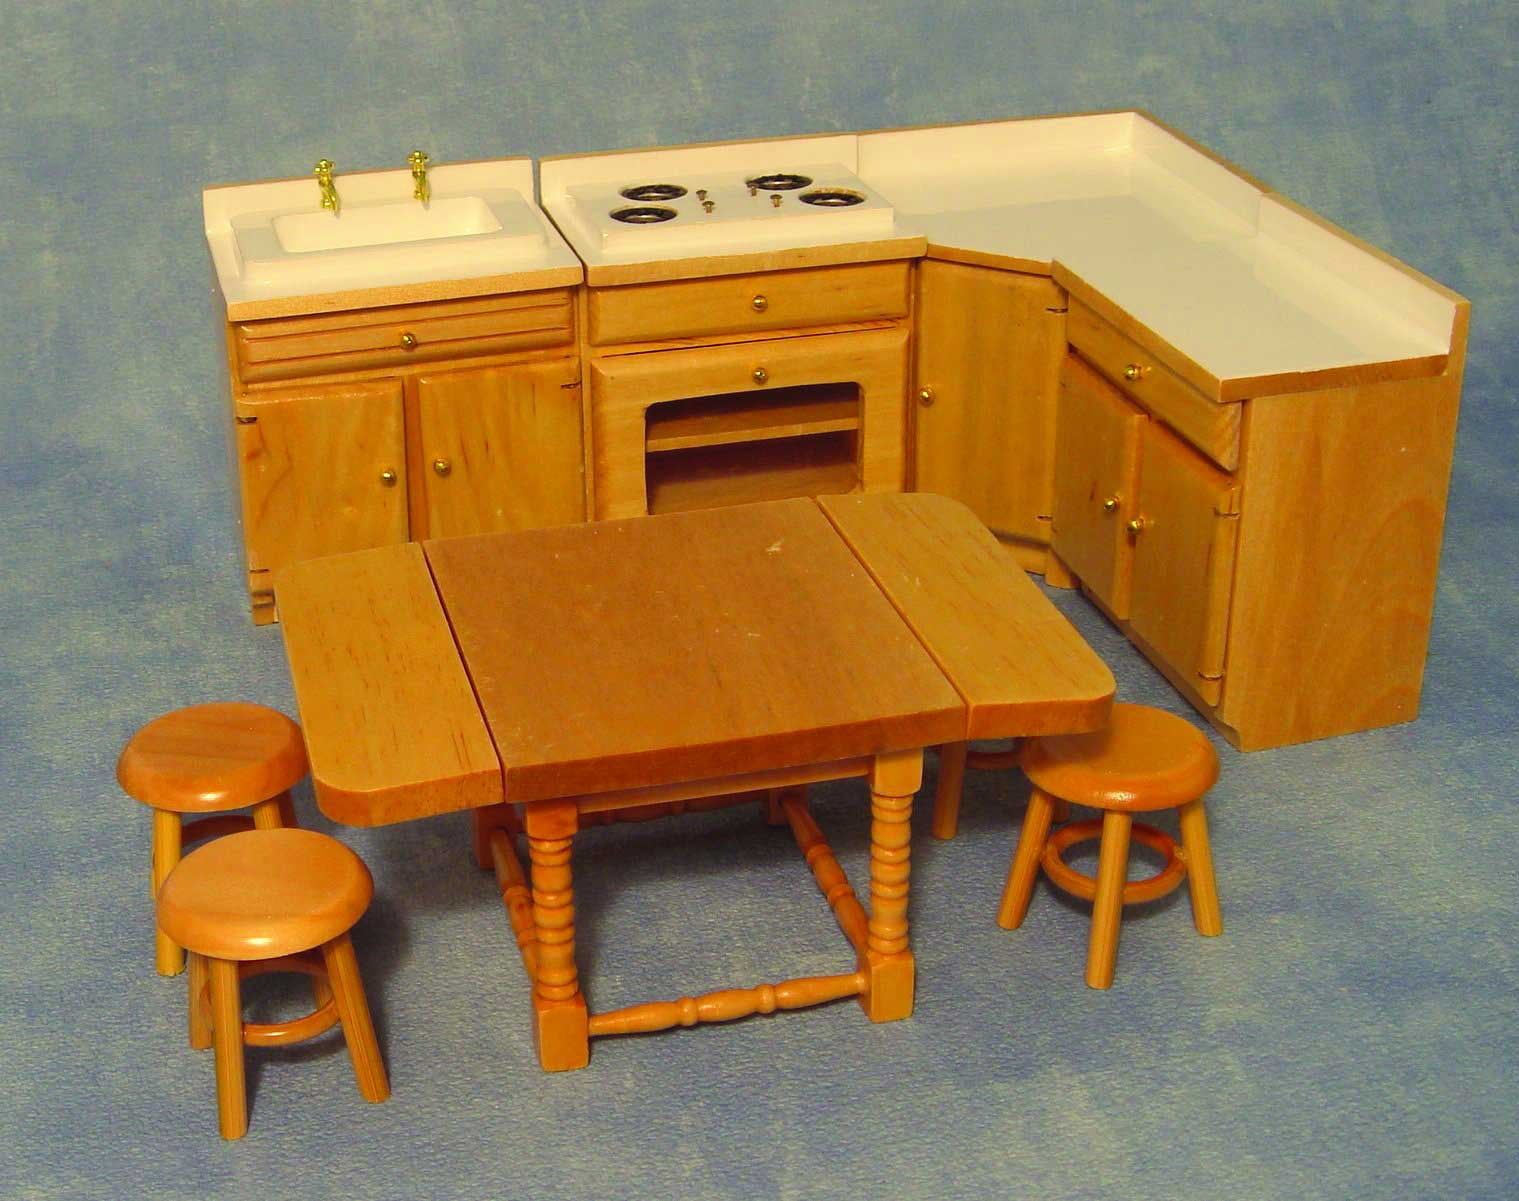 Pine Kitchen Set for 12th Scale Dolls House